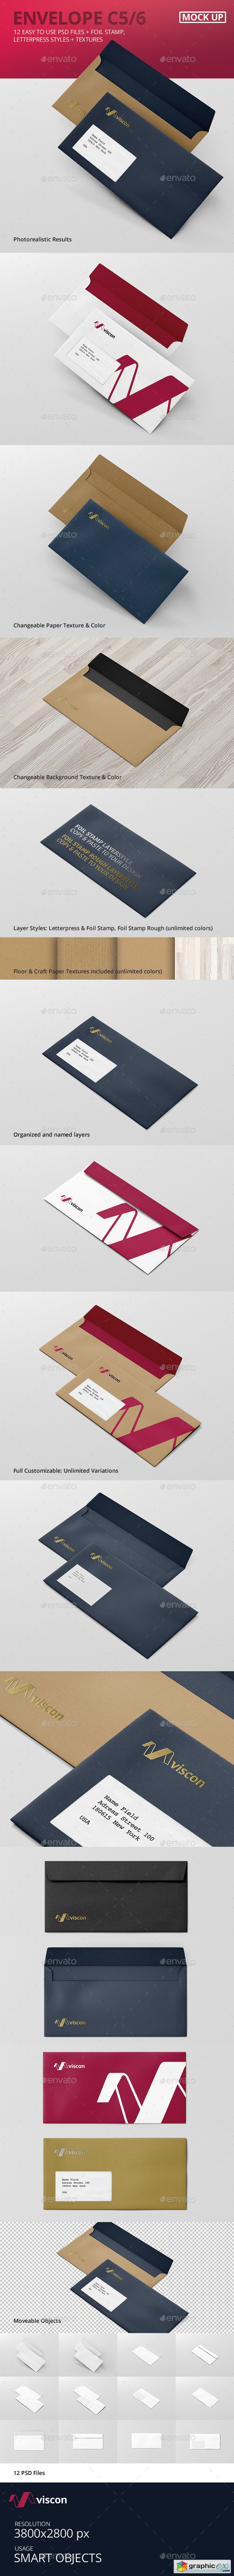 Download Envelope C5 6 Mock Up Free Download Vector Stock Image Photoshop Icon PSD Mockup Templates